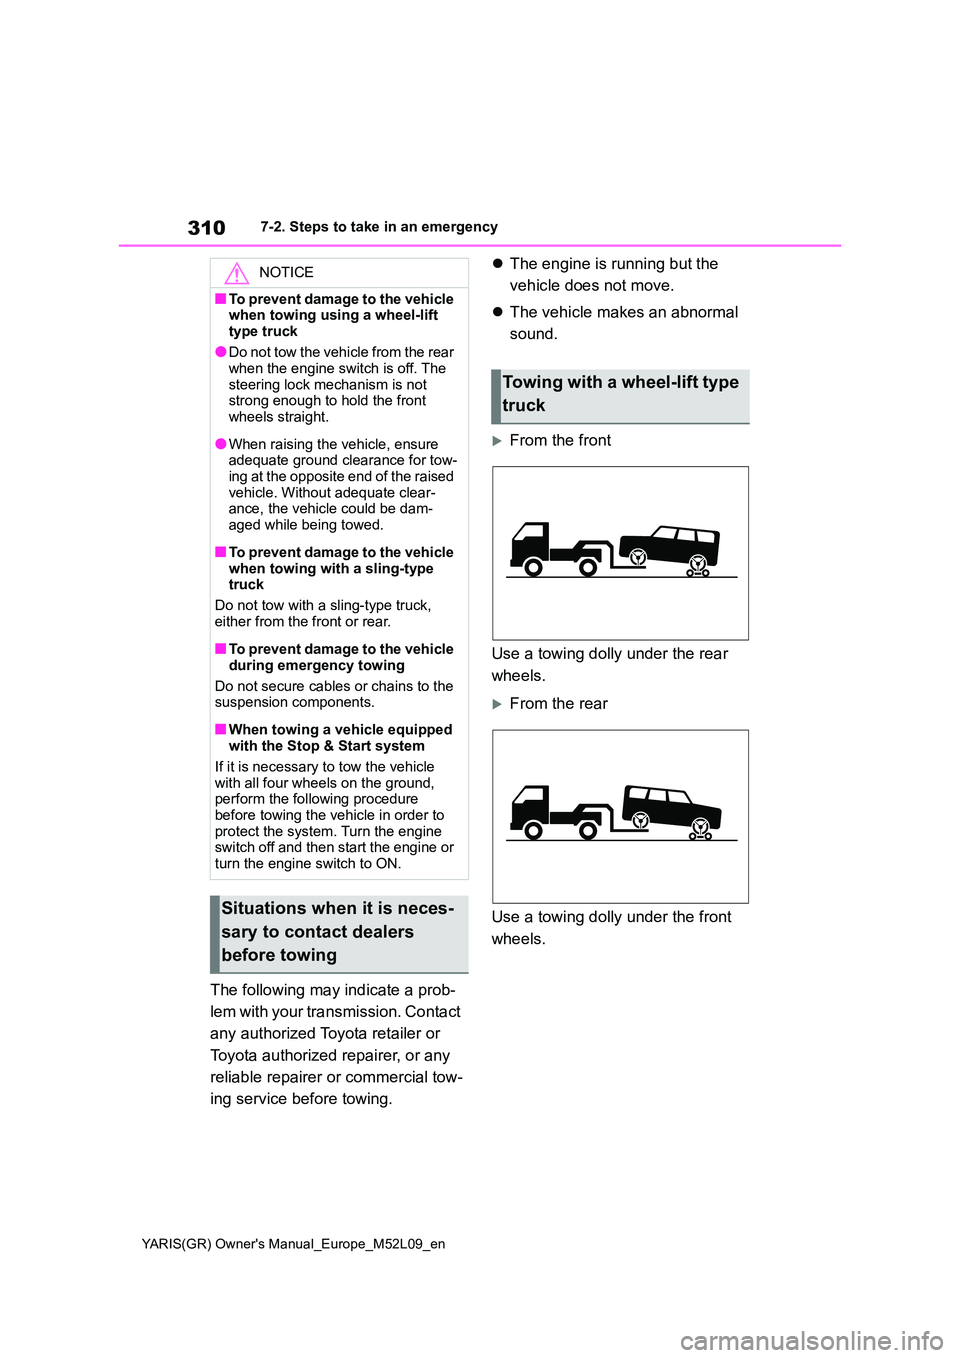 TOYOTA GR YARIS 2020  Owners Manual (in English) 310
YARIS(GR) Owners Manual_Europe_M52L09_en
7-2. Steps to take in an emergency
The following may indicate a prob- 
lem with your transmission. Contact  
any authorized Toyota retailer or  
Toyota au